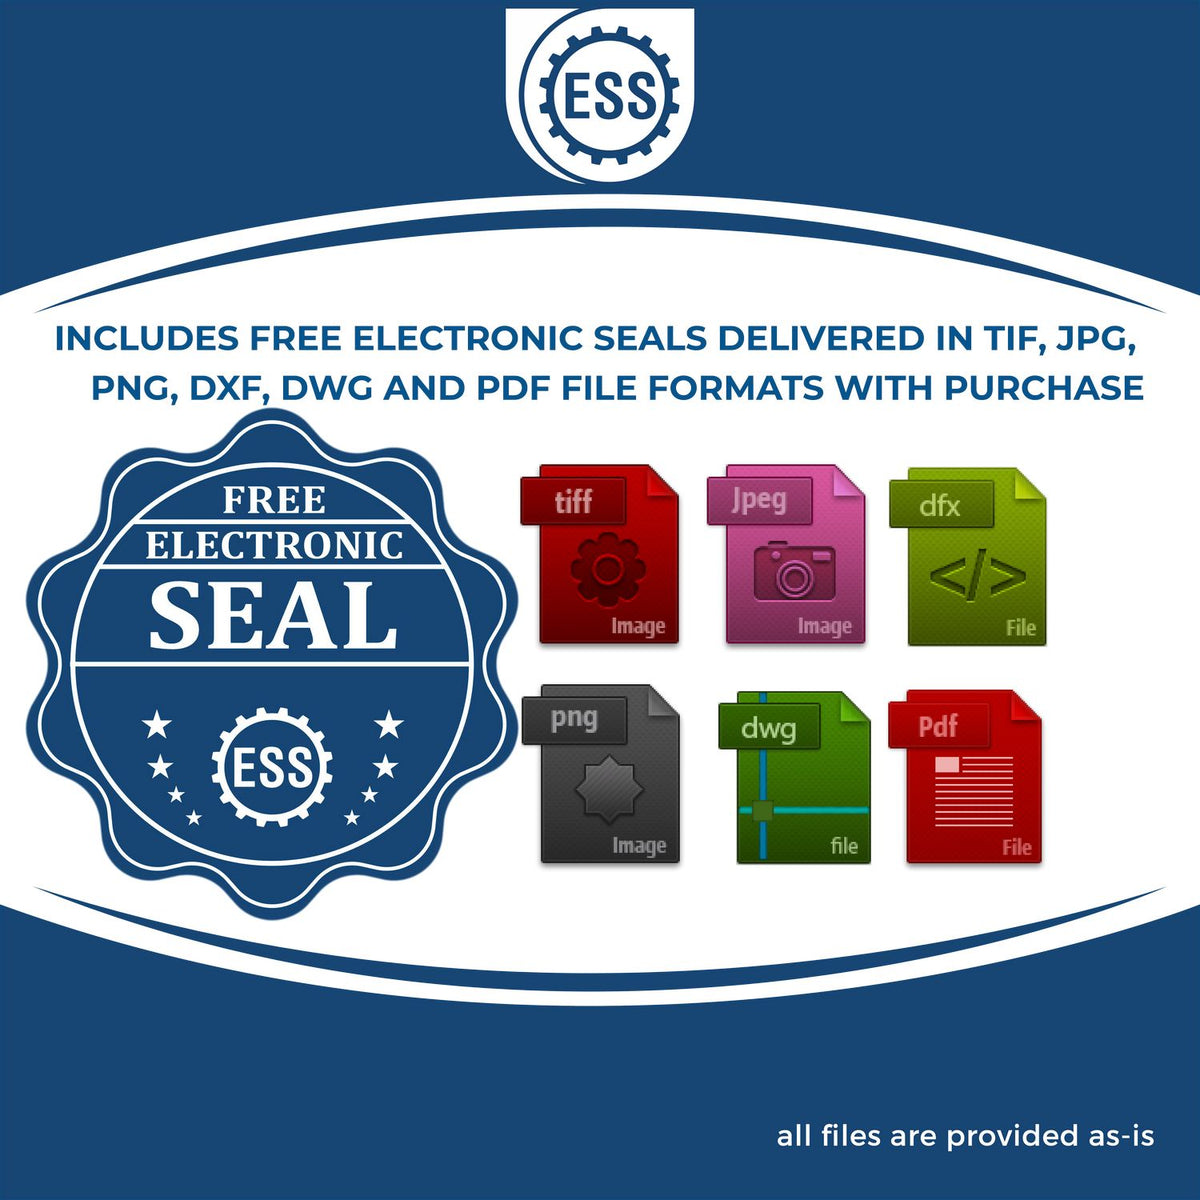 An infographic for the free electronic seal for the Self-Inking New York Landscape Architect Stamp illustrating the different file type icons such as DXF, DWG, TIF, JPG and PNG.